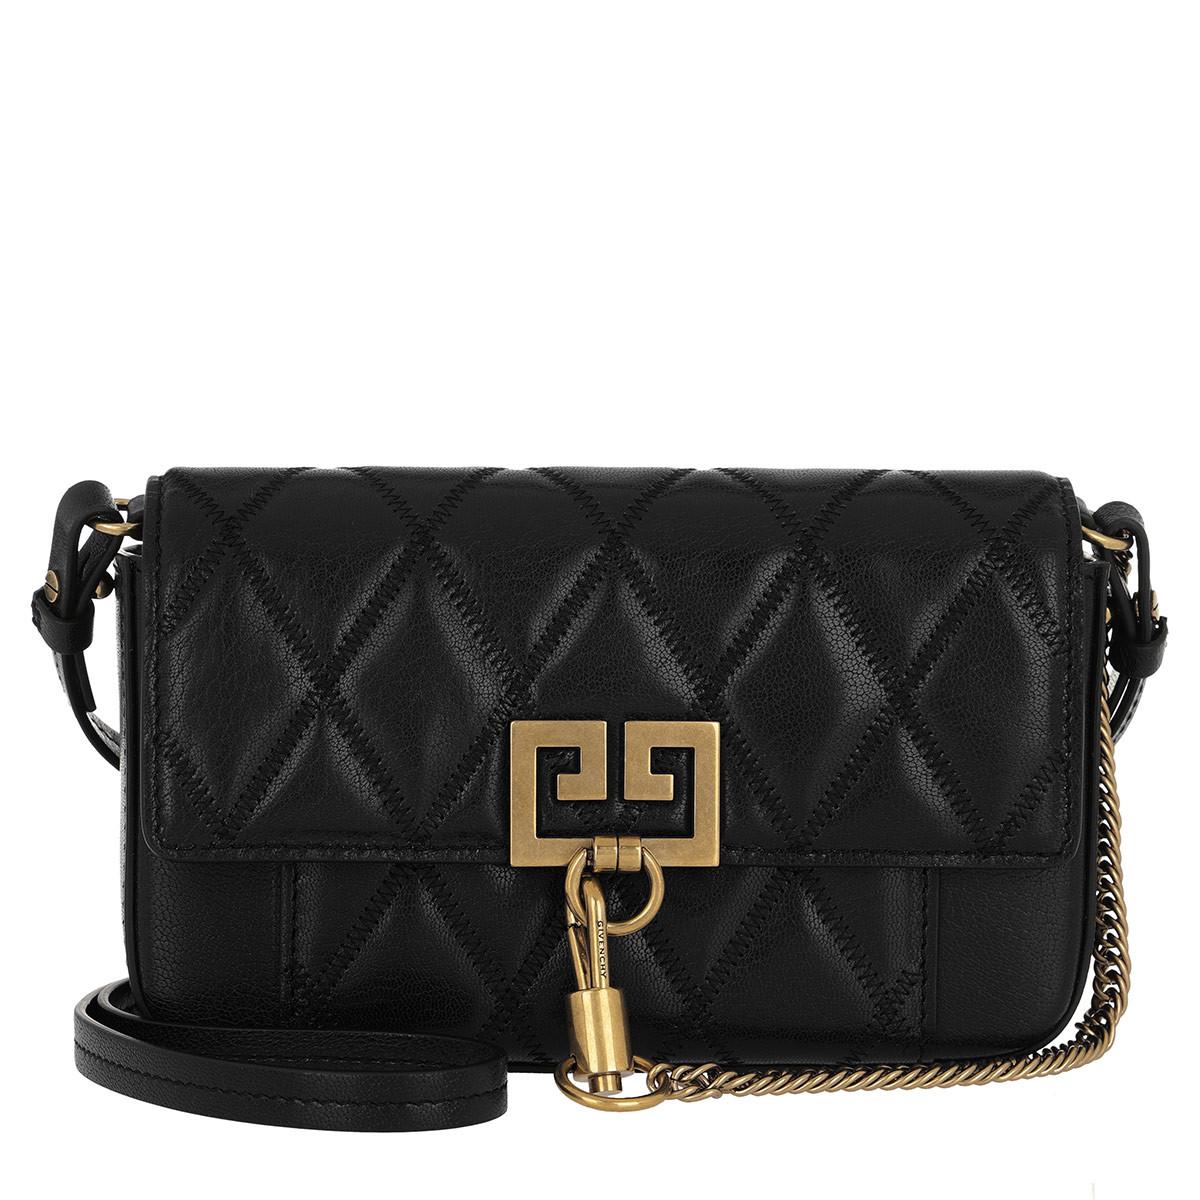 givenchy quilted tote